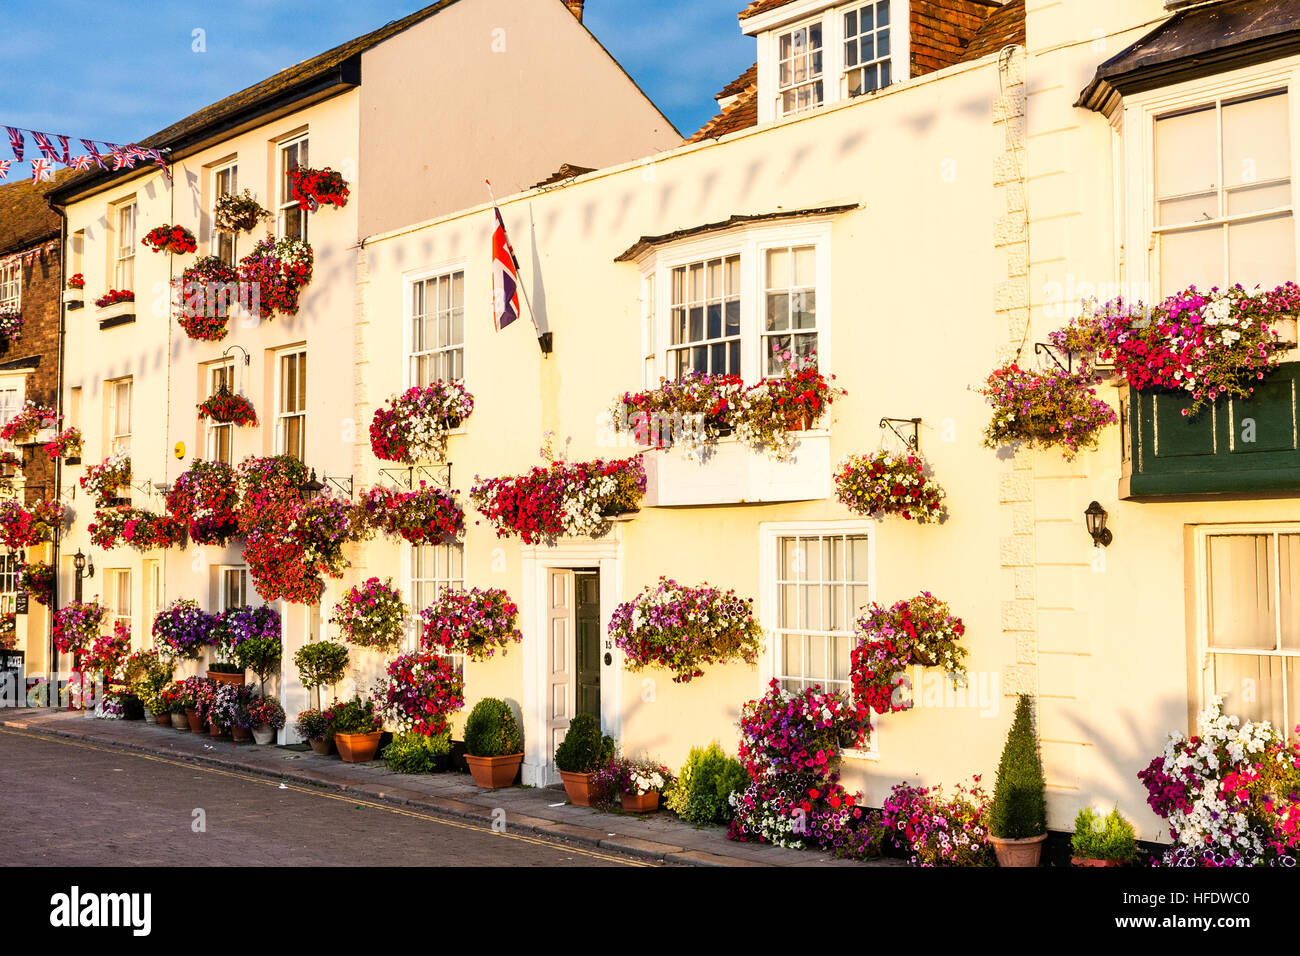 England, Deal. View along row of 17th and 18th century buildings along seafront, all decked with red flowers in boxes. Picturesque. Sunlit. Union Jack. Stock Photo